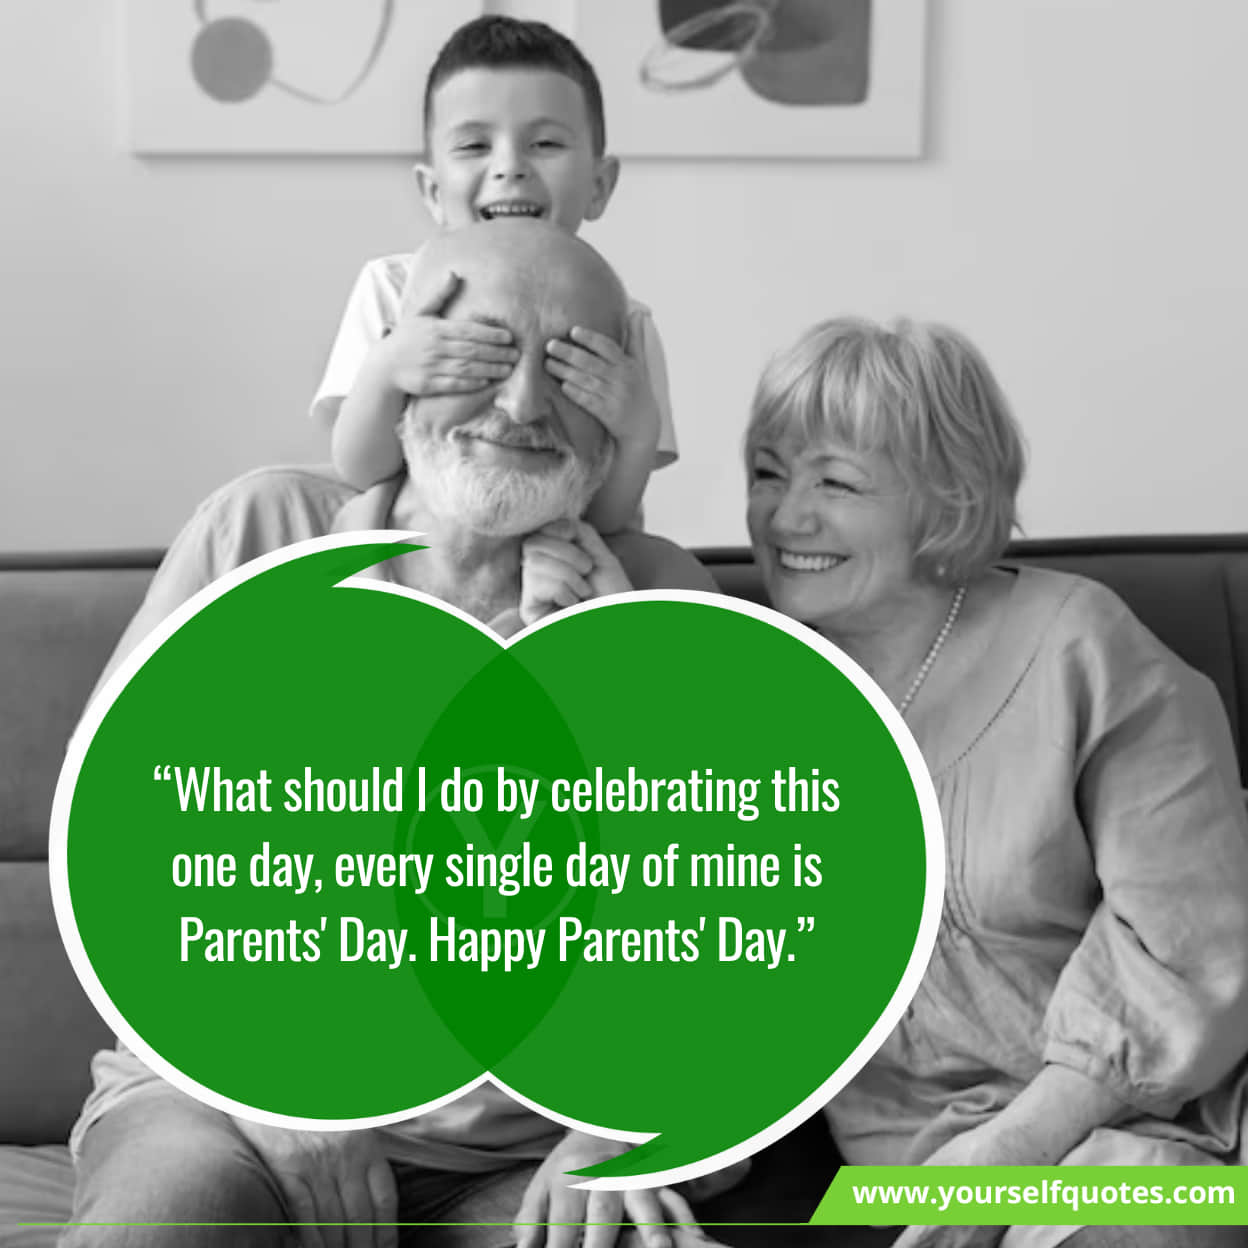 Wishing the best to amazing parents